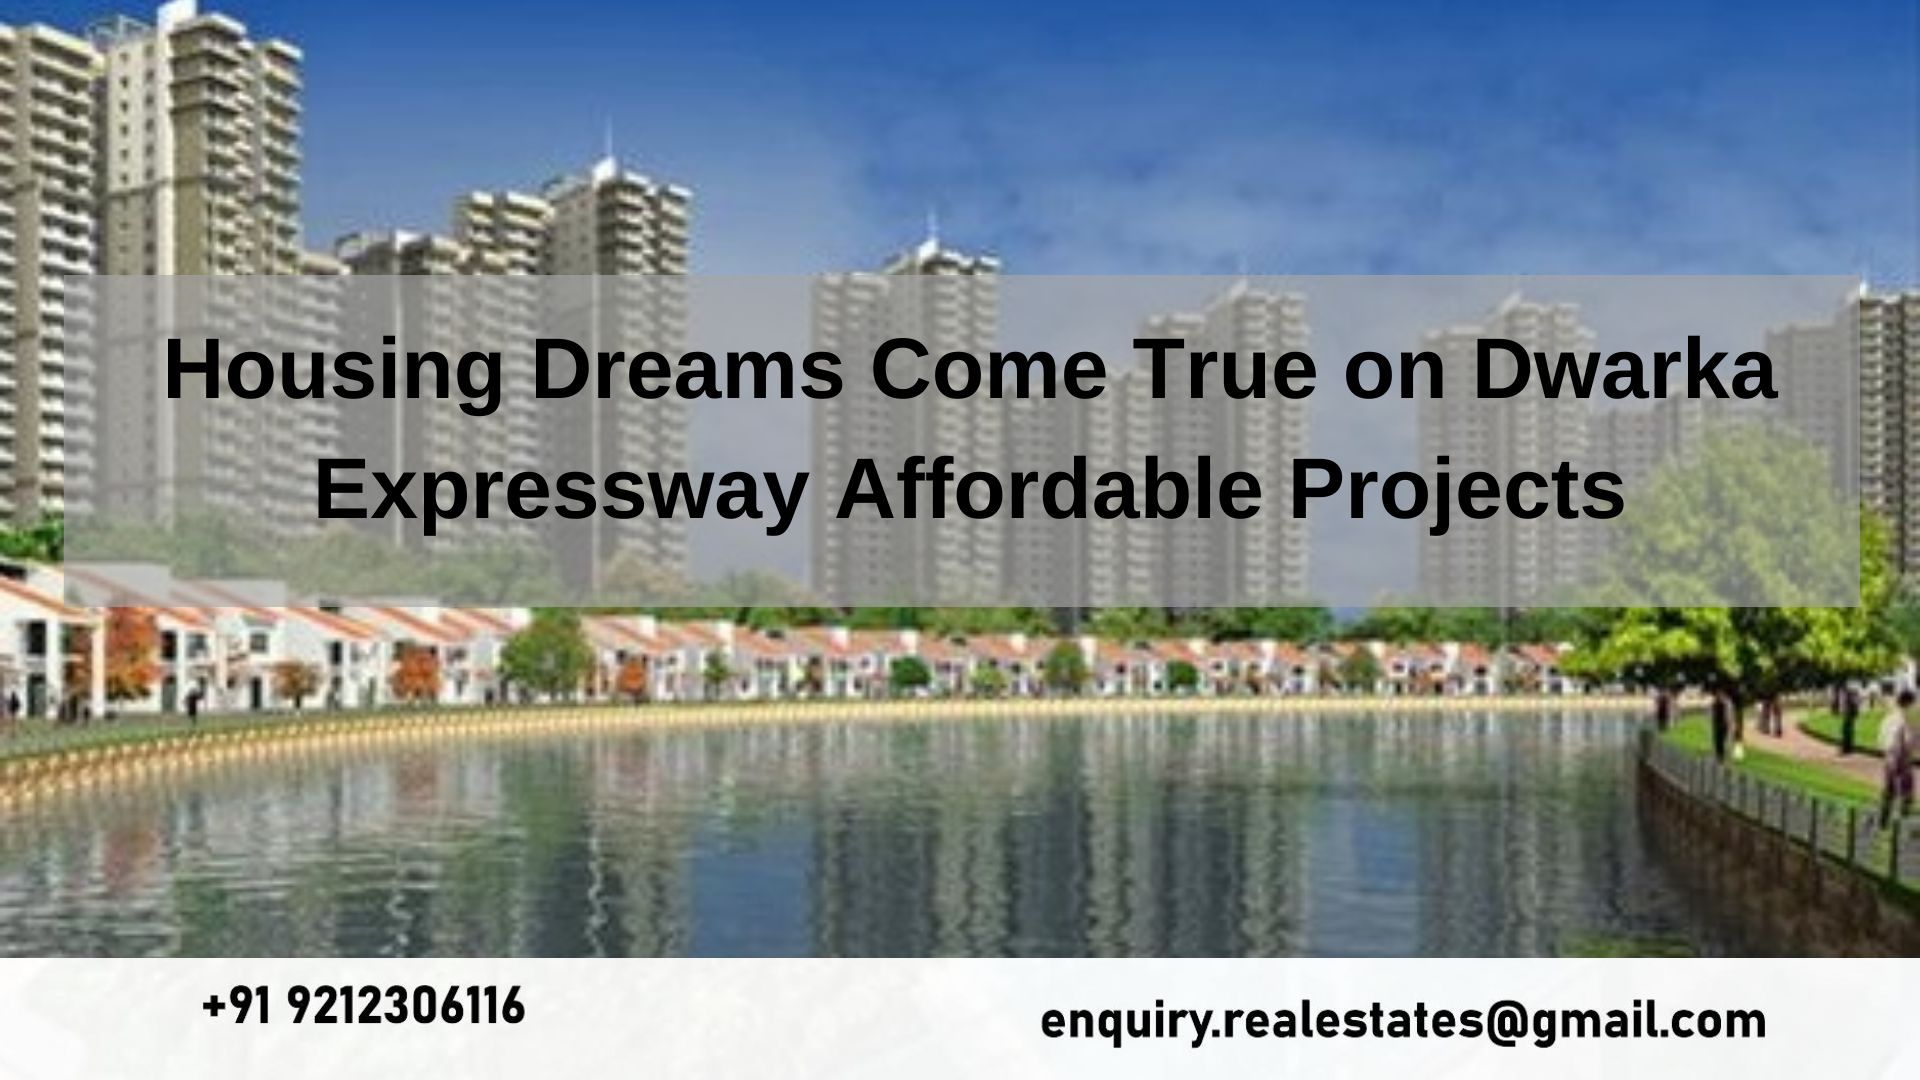 Housing Dreams Come True on Dwarka Expressway Affordable Projects